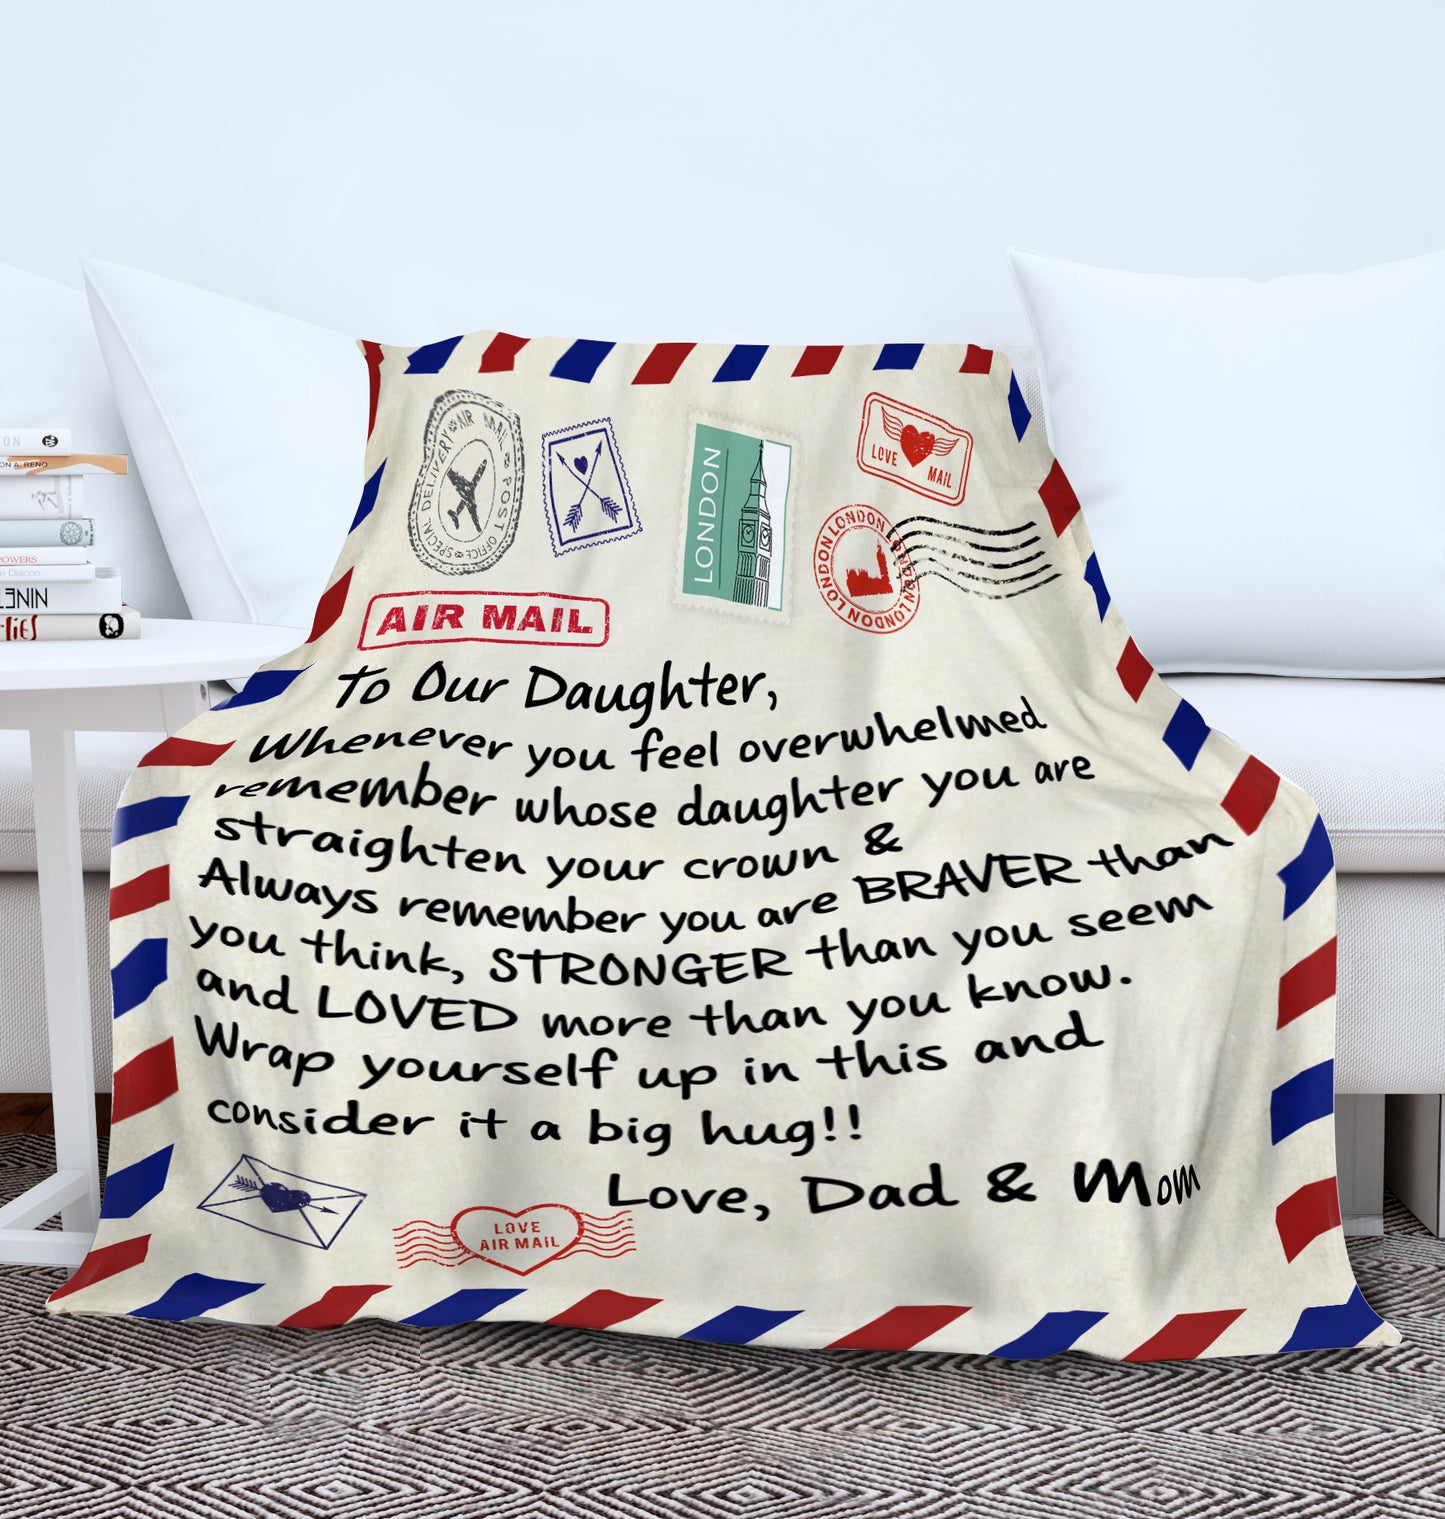 To My Daughter - Straighten Your Crown From Dad and Mom Premium Mink Sherpa Blanket 50x60